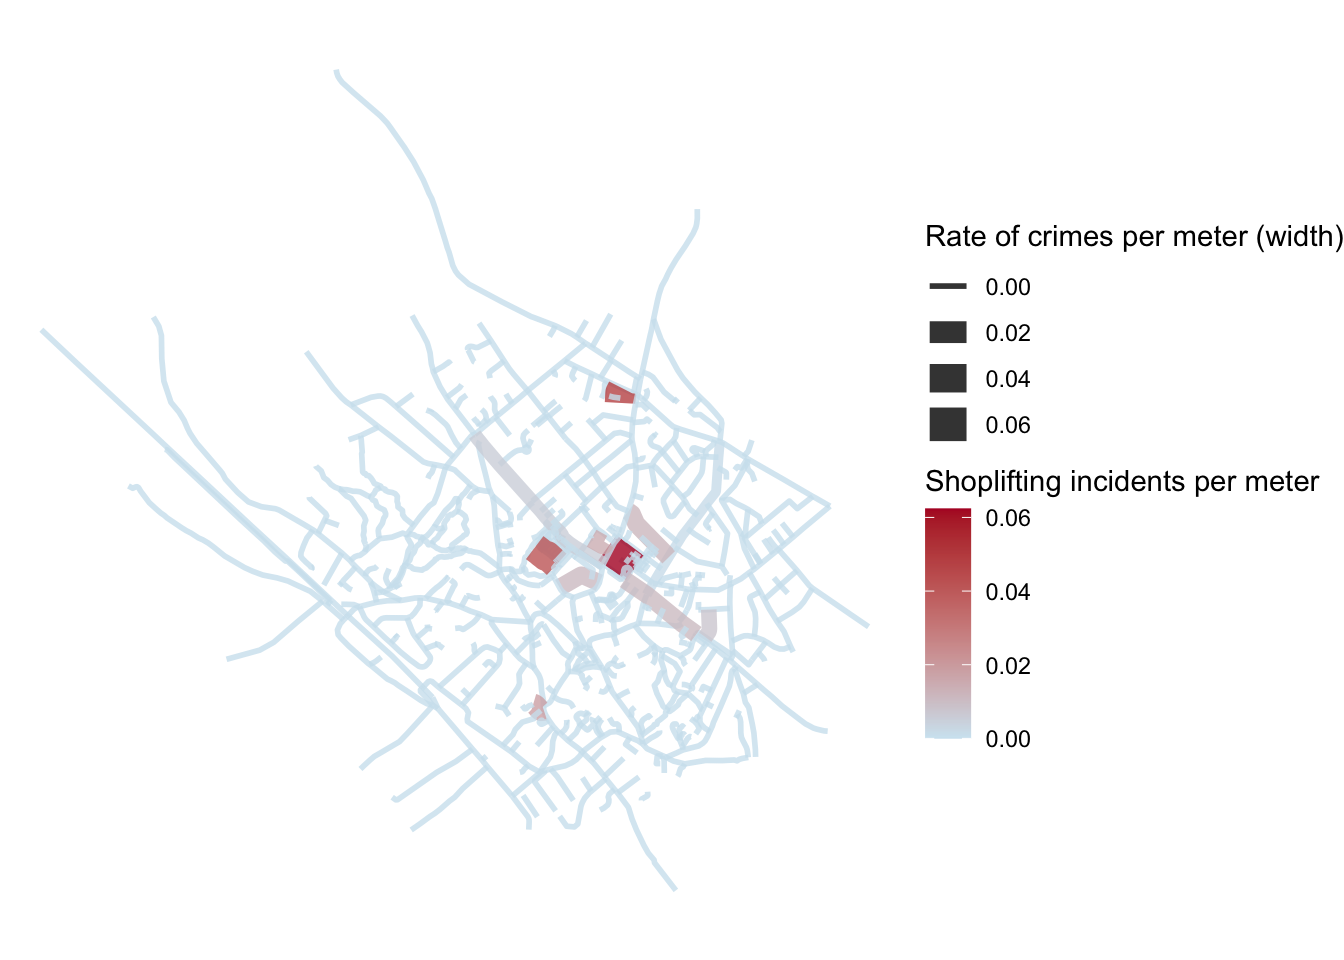 The previous figure has been slightly altered, and has gained a second legend labeled 'Rate of crimes per meter (width)', matching four examples of line widths to numbers from zero to point zero six. The width of streets shaded darker has grown, with some of the more red streets being wider than their length.